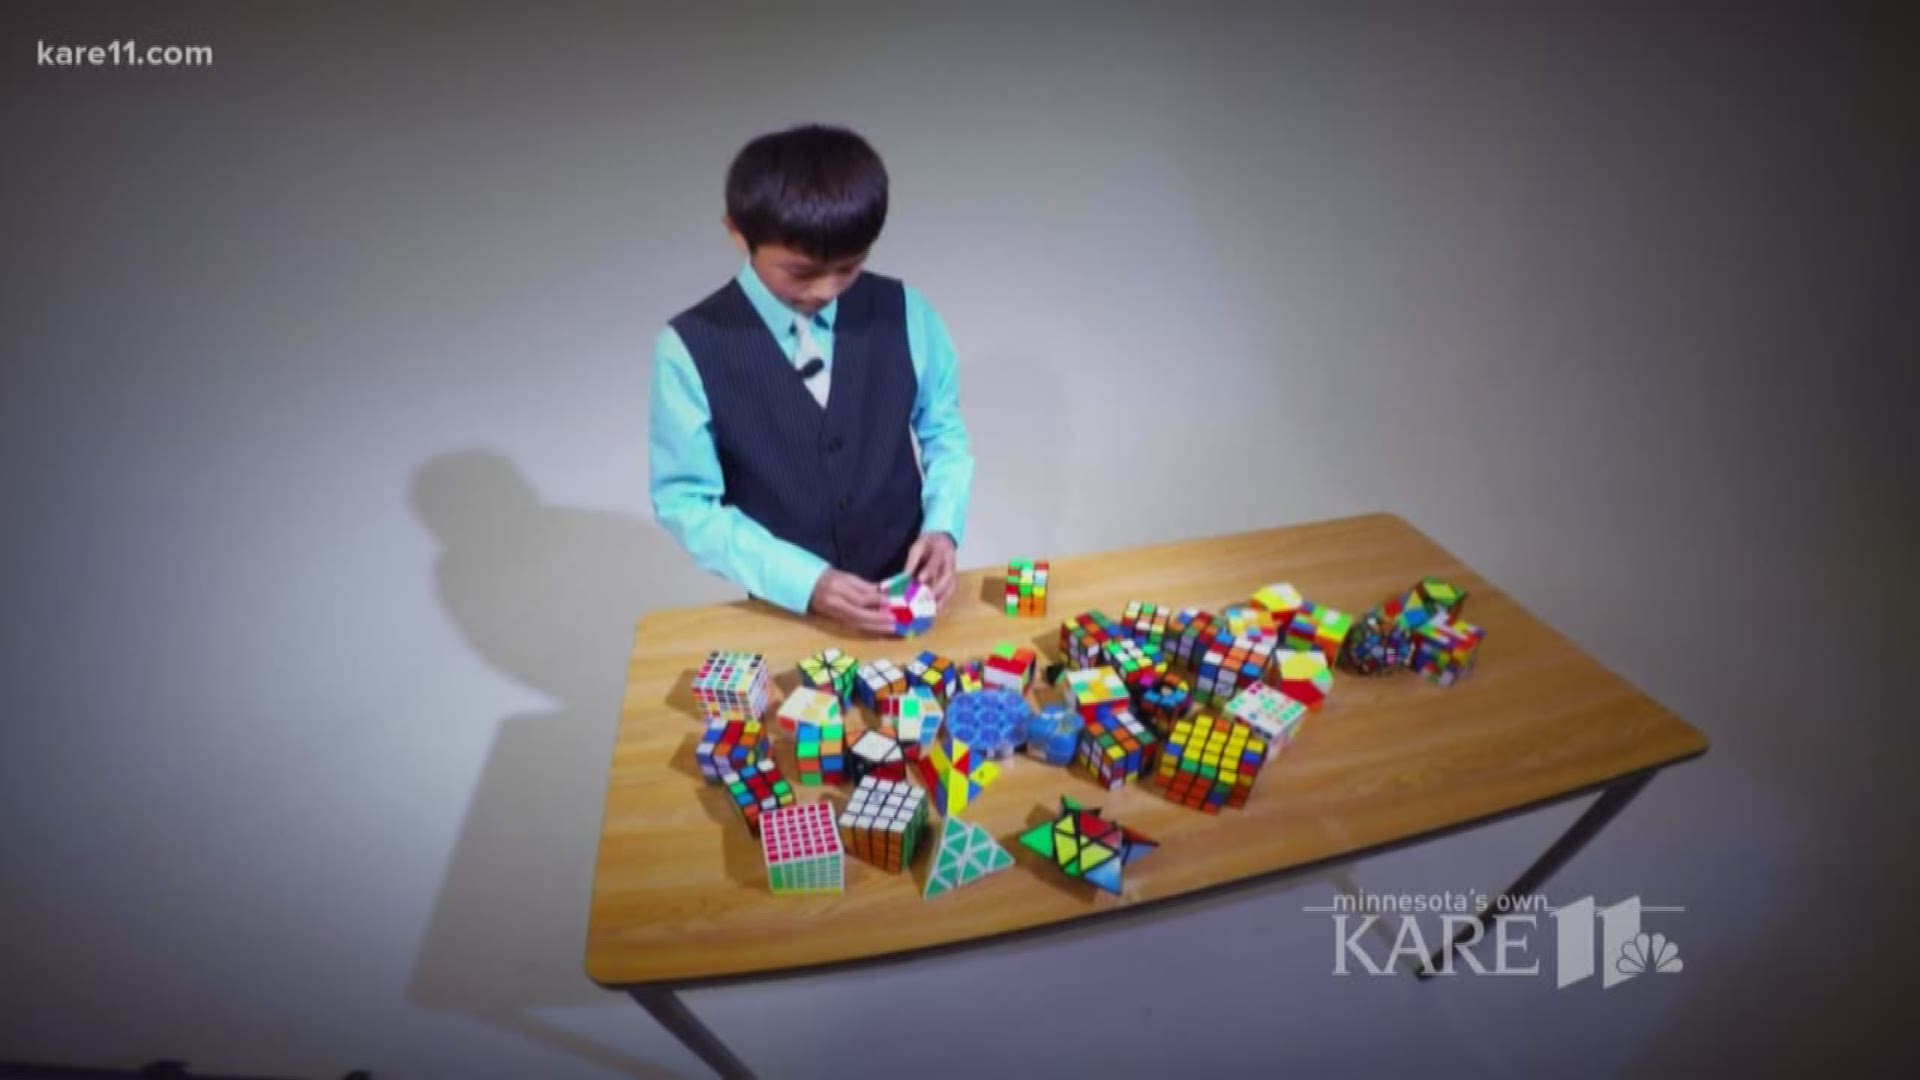 Meet 7th grader who solves Rubik's Cube in seconds